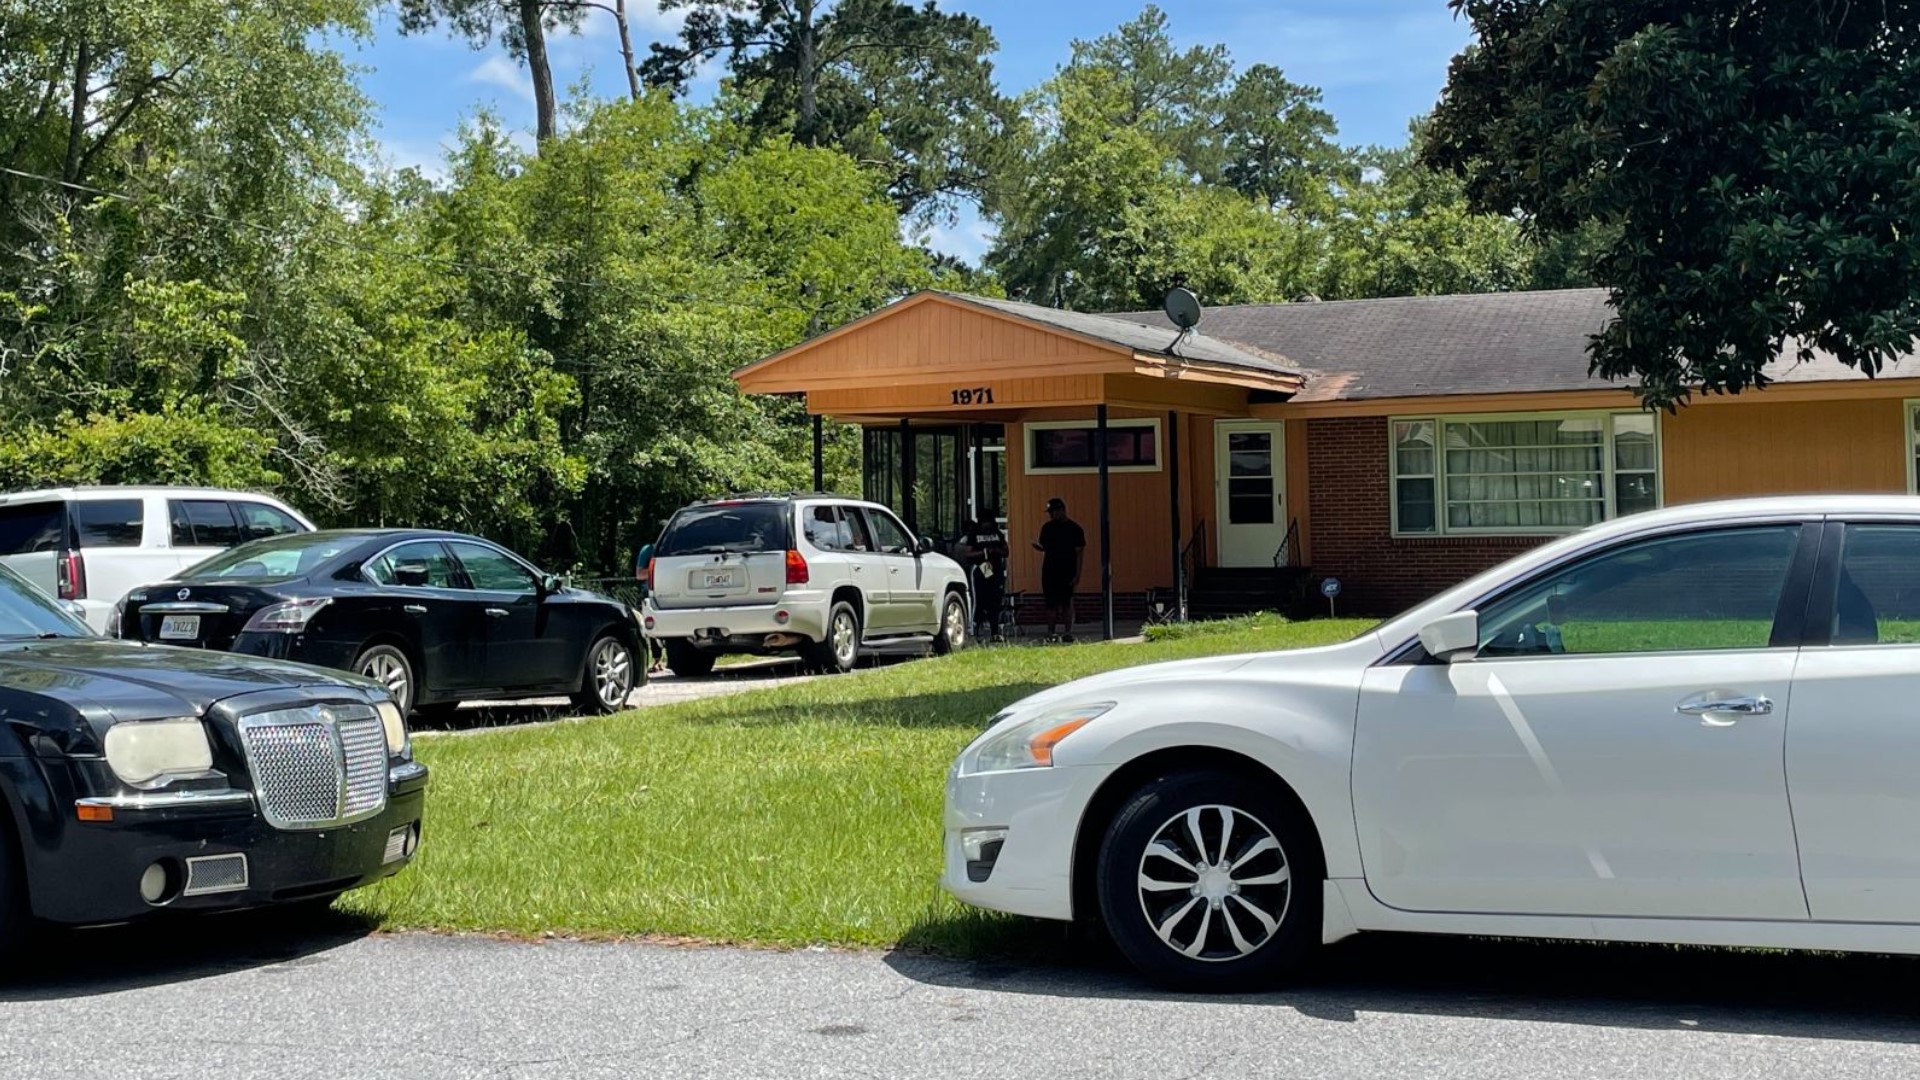 The Bibb County Sheriff’s Office is investigating a shooting that left a woman dead Monday afternoon.